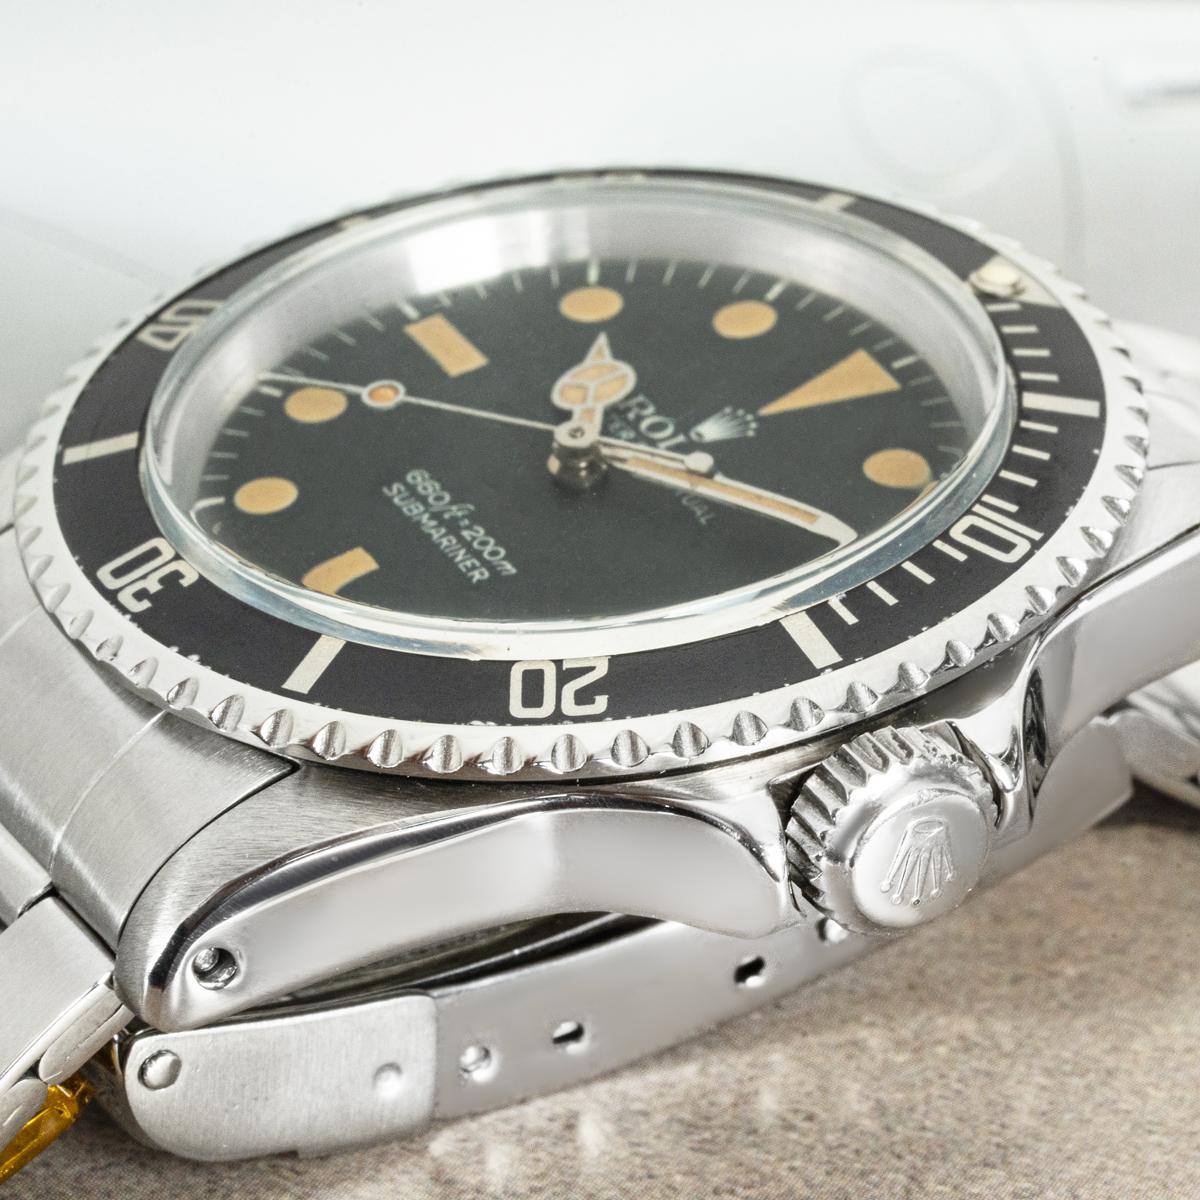 A vintage, 40mm 5513 Submariner Non-Date by Rolex in stainless steel. Featuring a matte black dial and a steel bi-directional rotating black bezel. Fitted with a plastic glass and a self-winding automatic movement, the watch is brought together by a